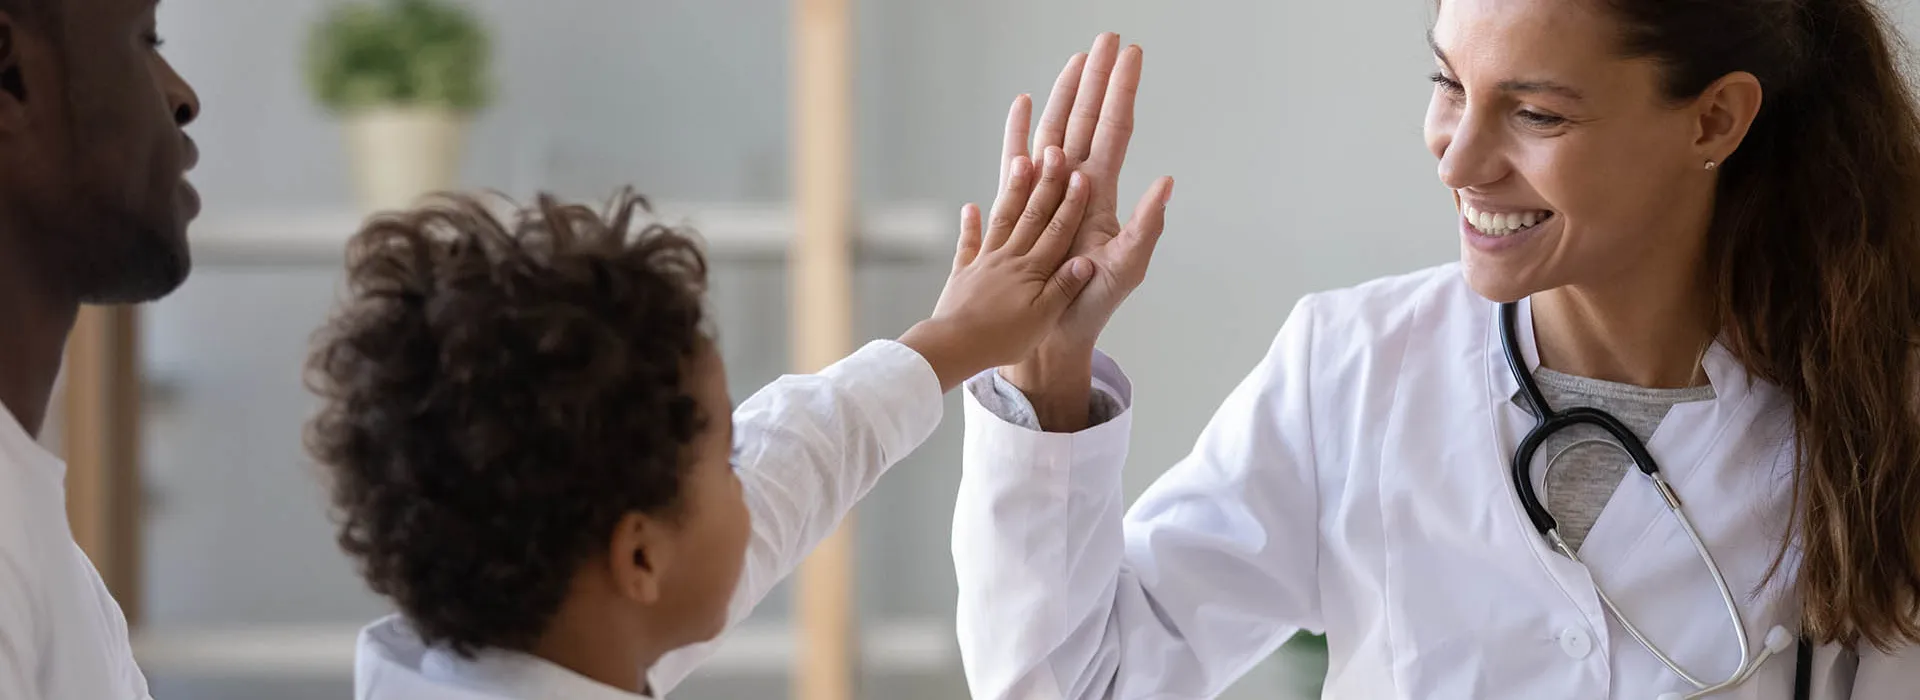 high five between doctor and child 